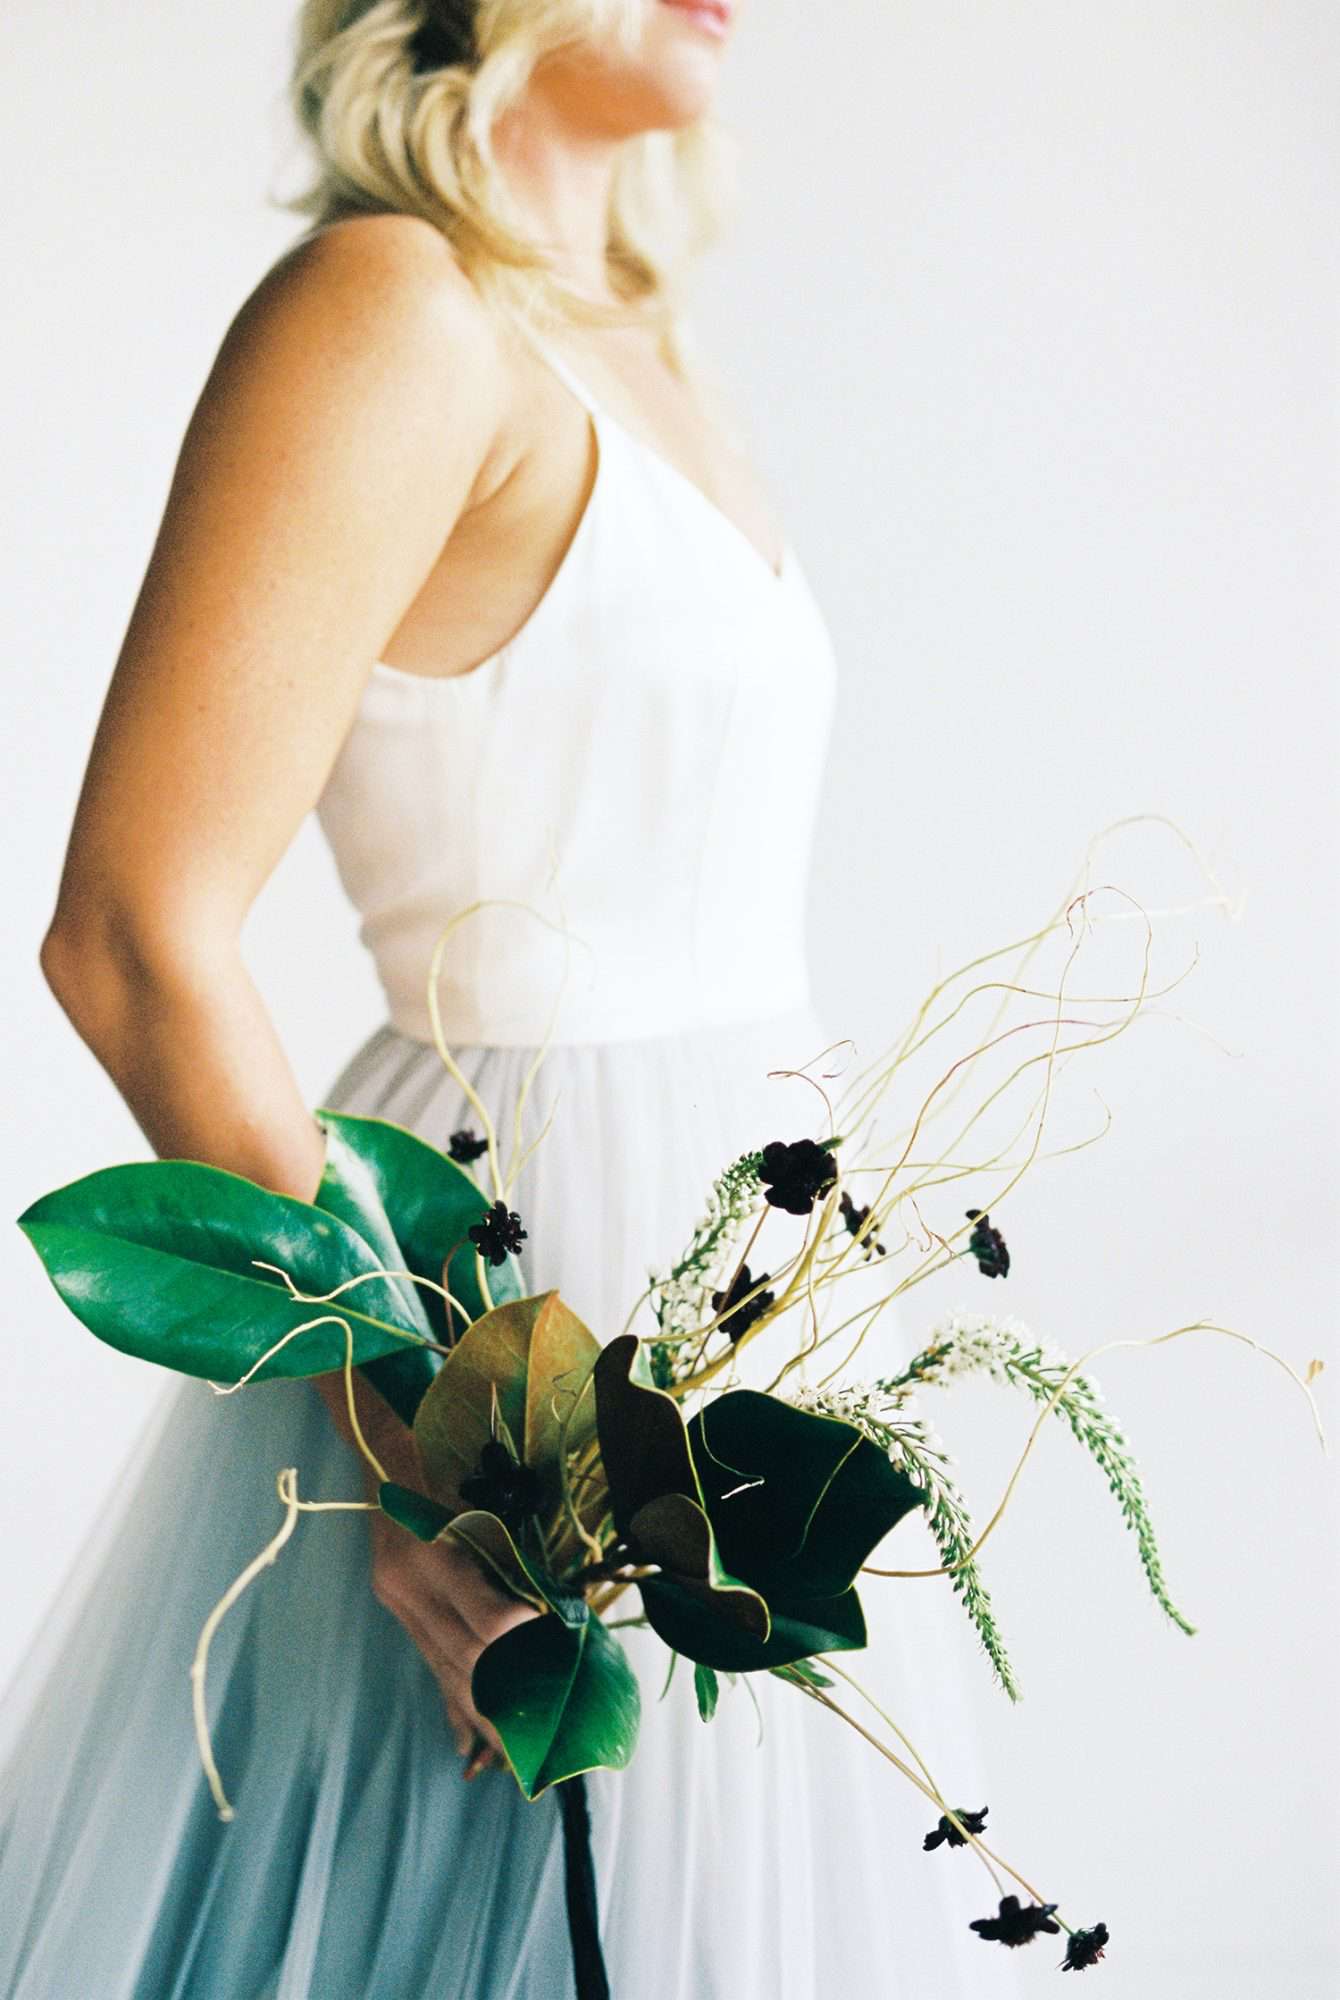 Modern Wedding Flowers - bridal bouquet with greenery, magnolia leaves and astilbe